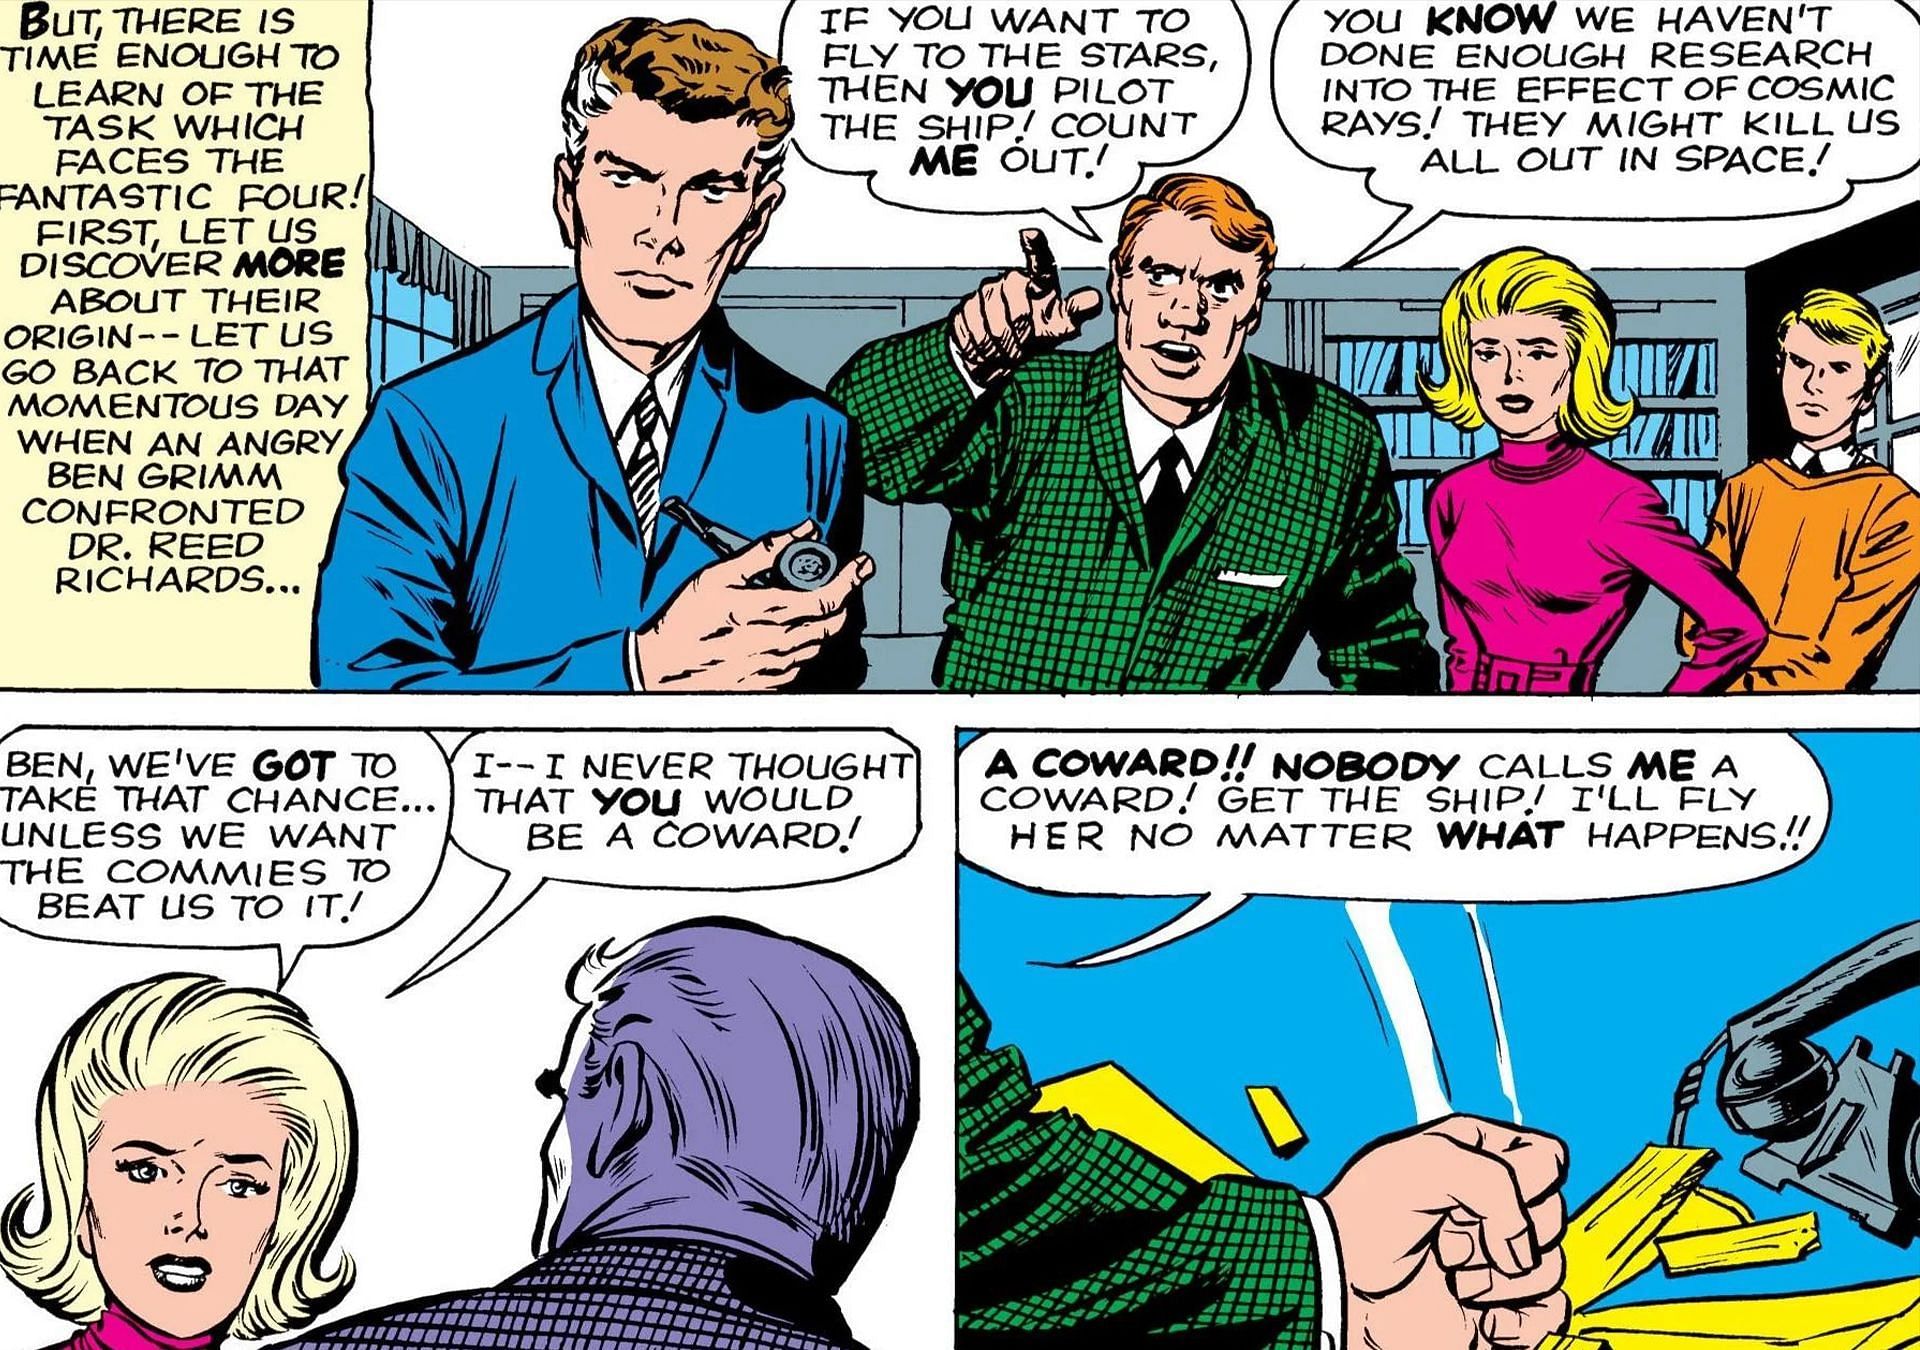 Sue Storm and Mr. Fantastic in The Fantastic Four #1 (Image via Marvel)